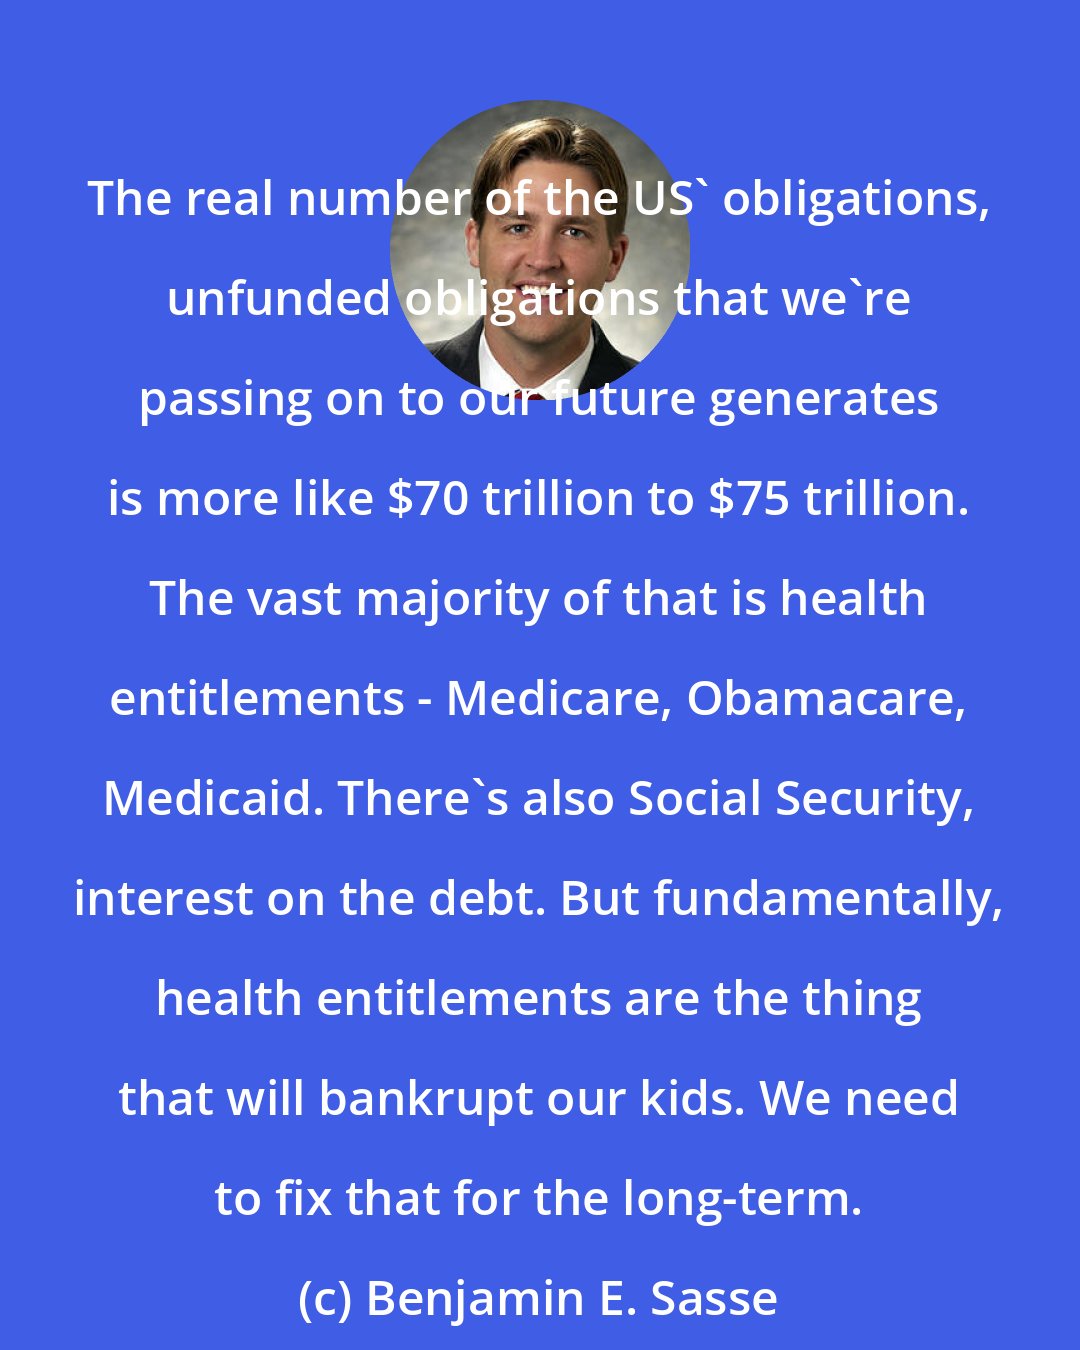 Benjamin E. Sasse: The real number of the US' obligations, unfunded obligations that we're passing on to our future generates is more like $70 trillion to $75 trillion. The vast majority of that is health entitlements - Medicare, Obamacare, Medicaid. There's also Social Security, interest on the debt. But fundamentally, health entitlements are the thing that will bankrupt our kids. We need to fix that for the long-term.